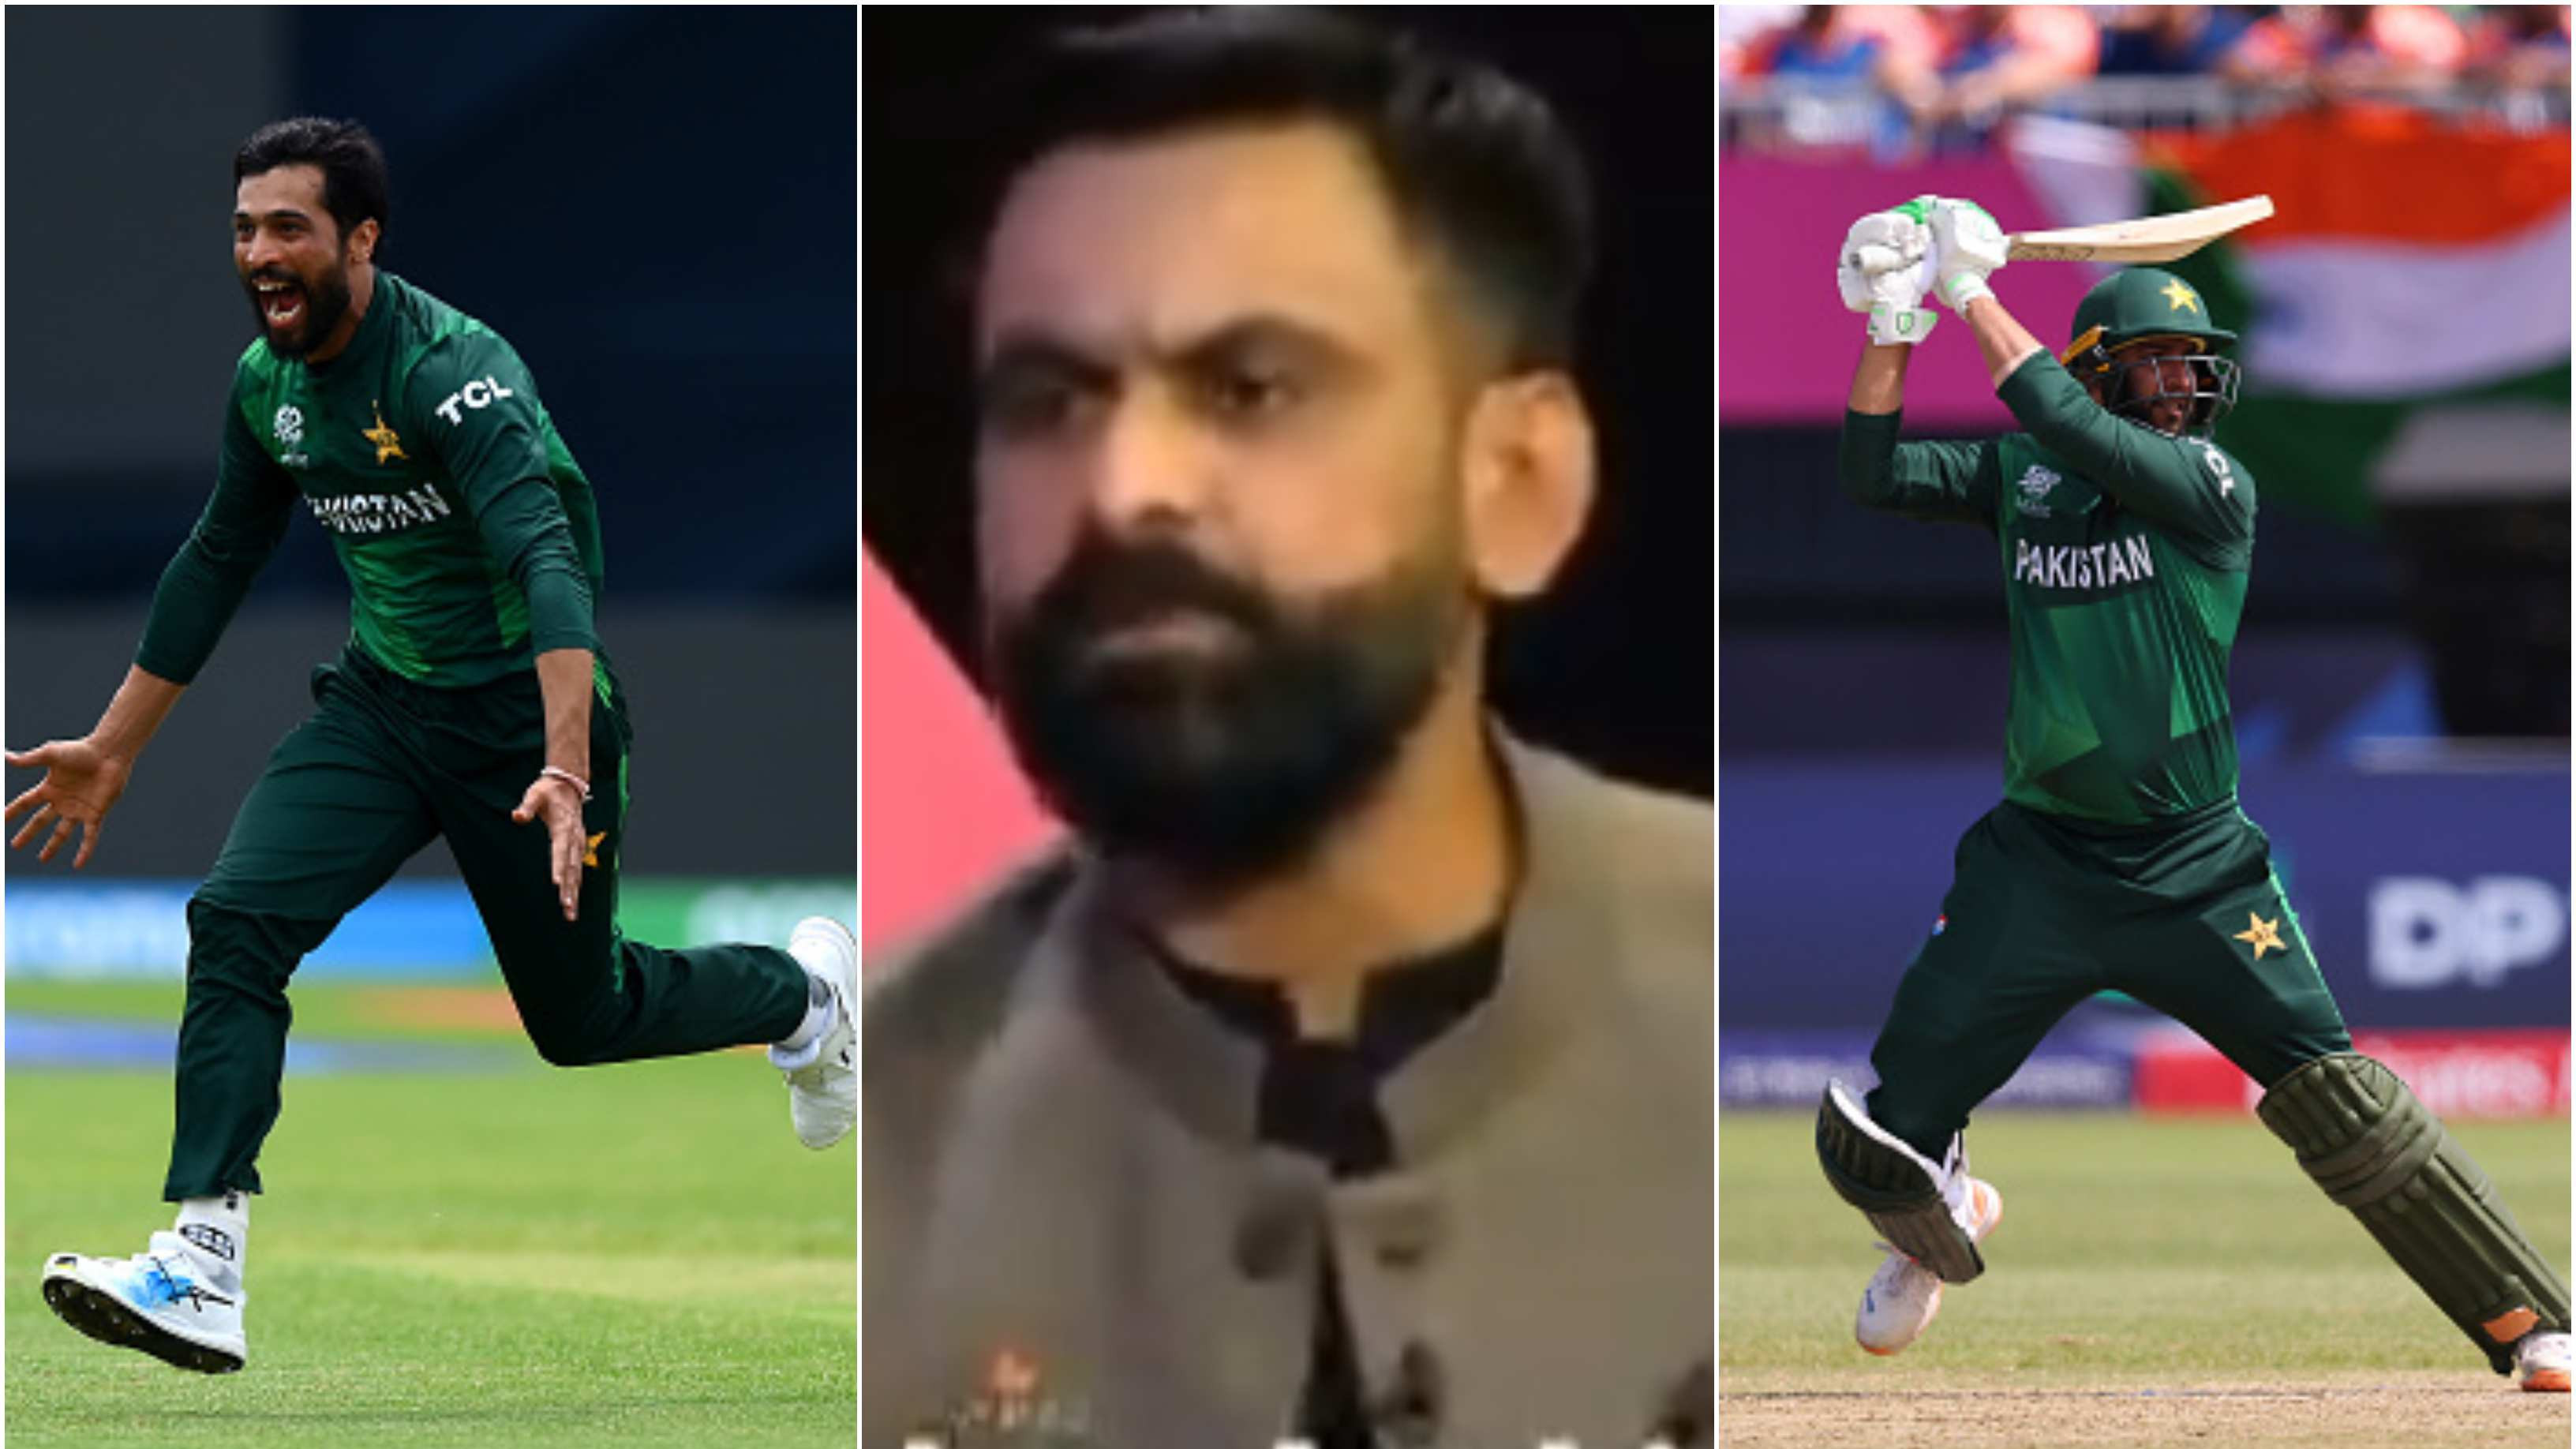 'PCB made deal with players who have ruined Pakistan's cricket': Hafeez makes shocking claims after team’s nervy loss to India